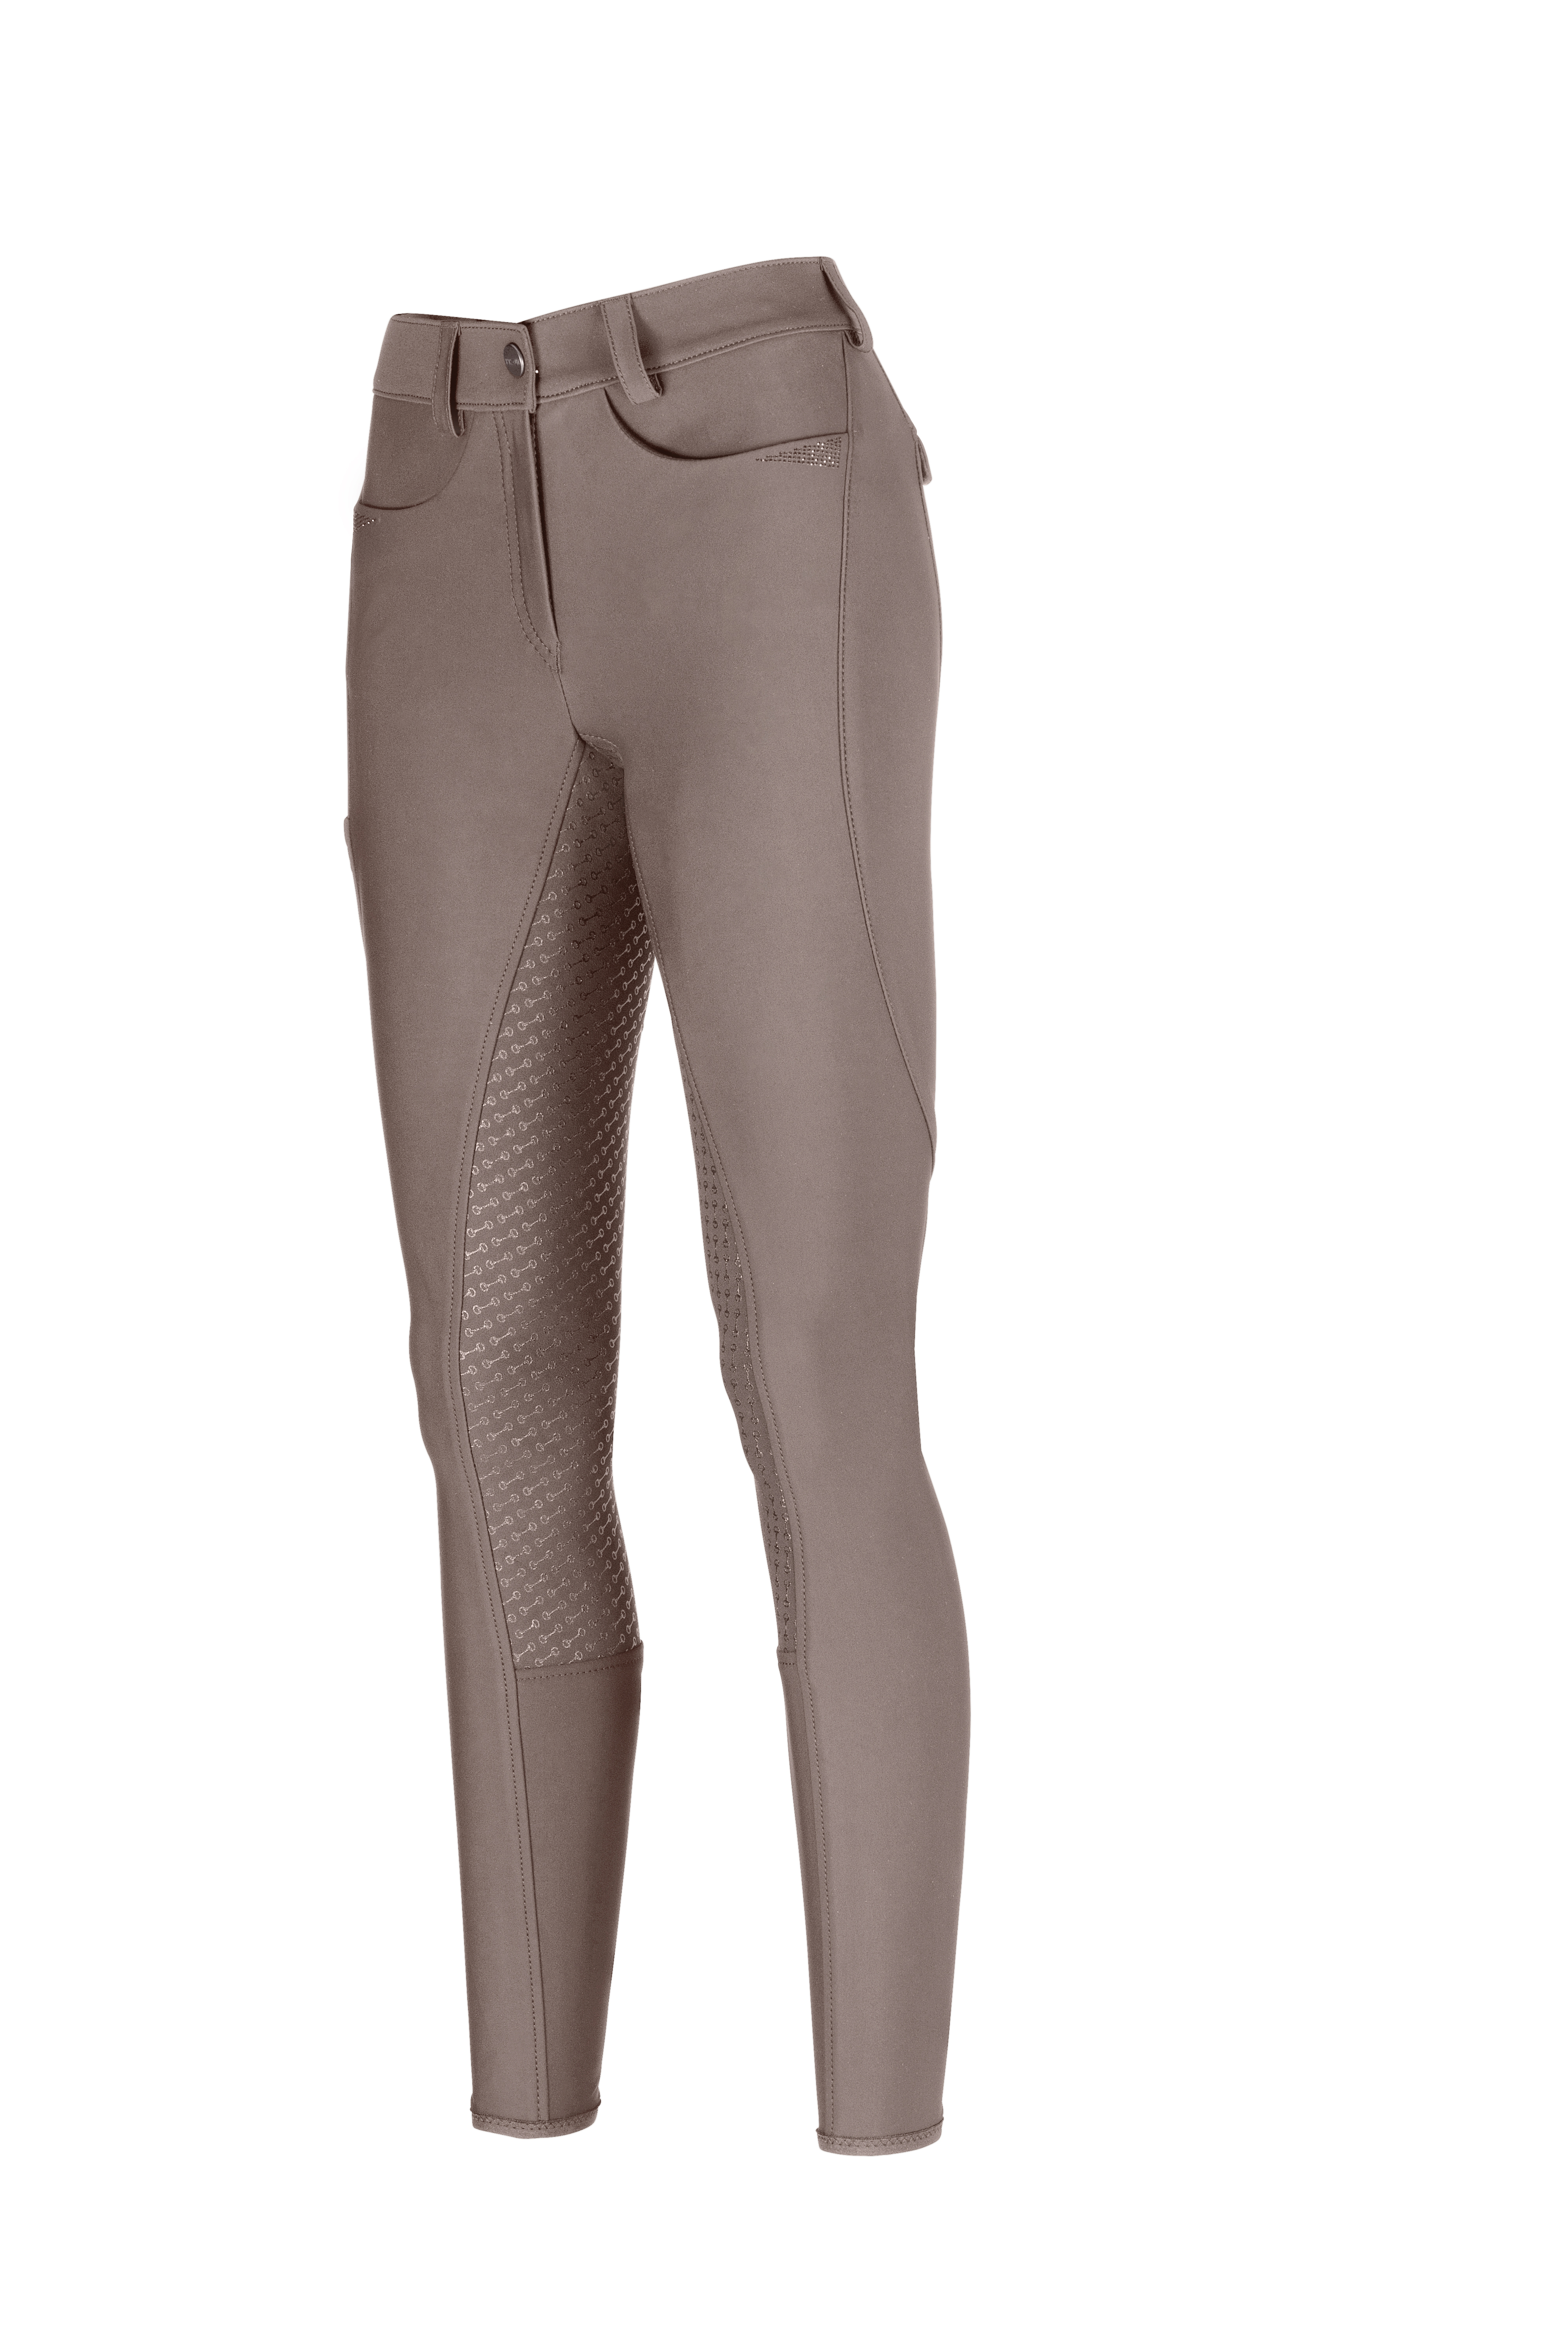 Pikeur LAURE GRIP Reithose, taupe